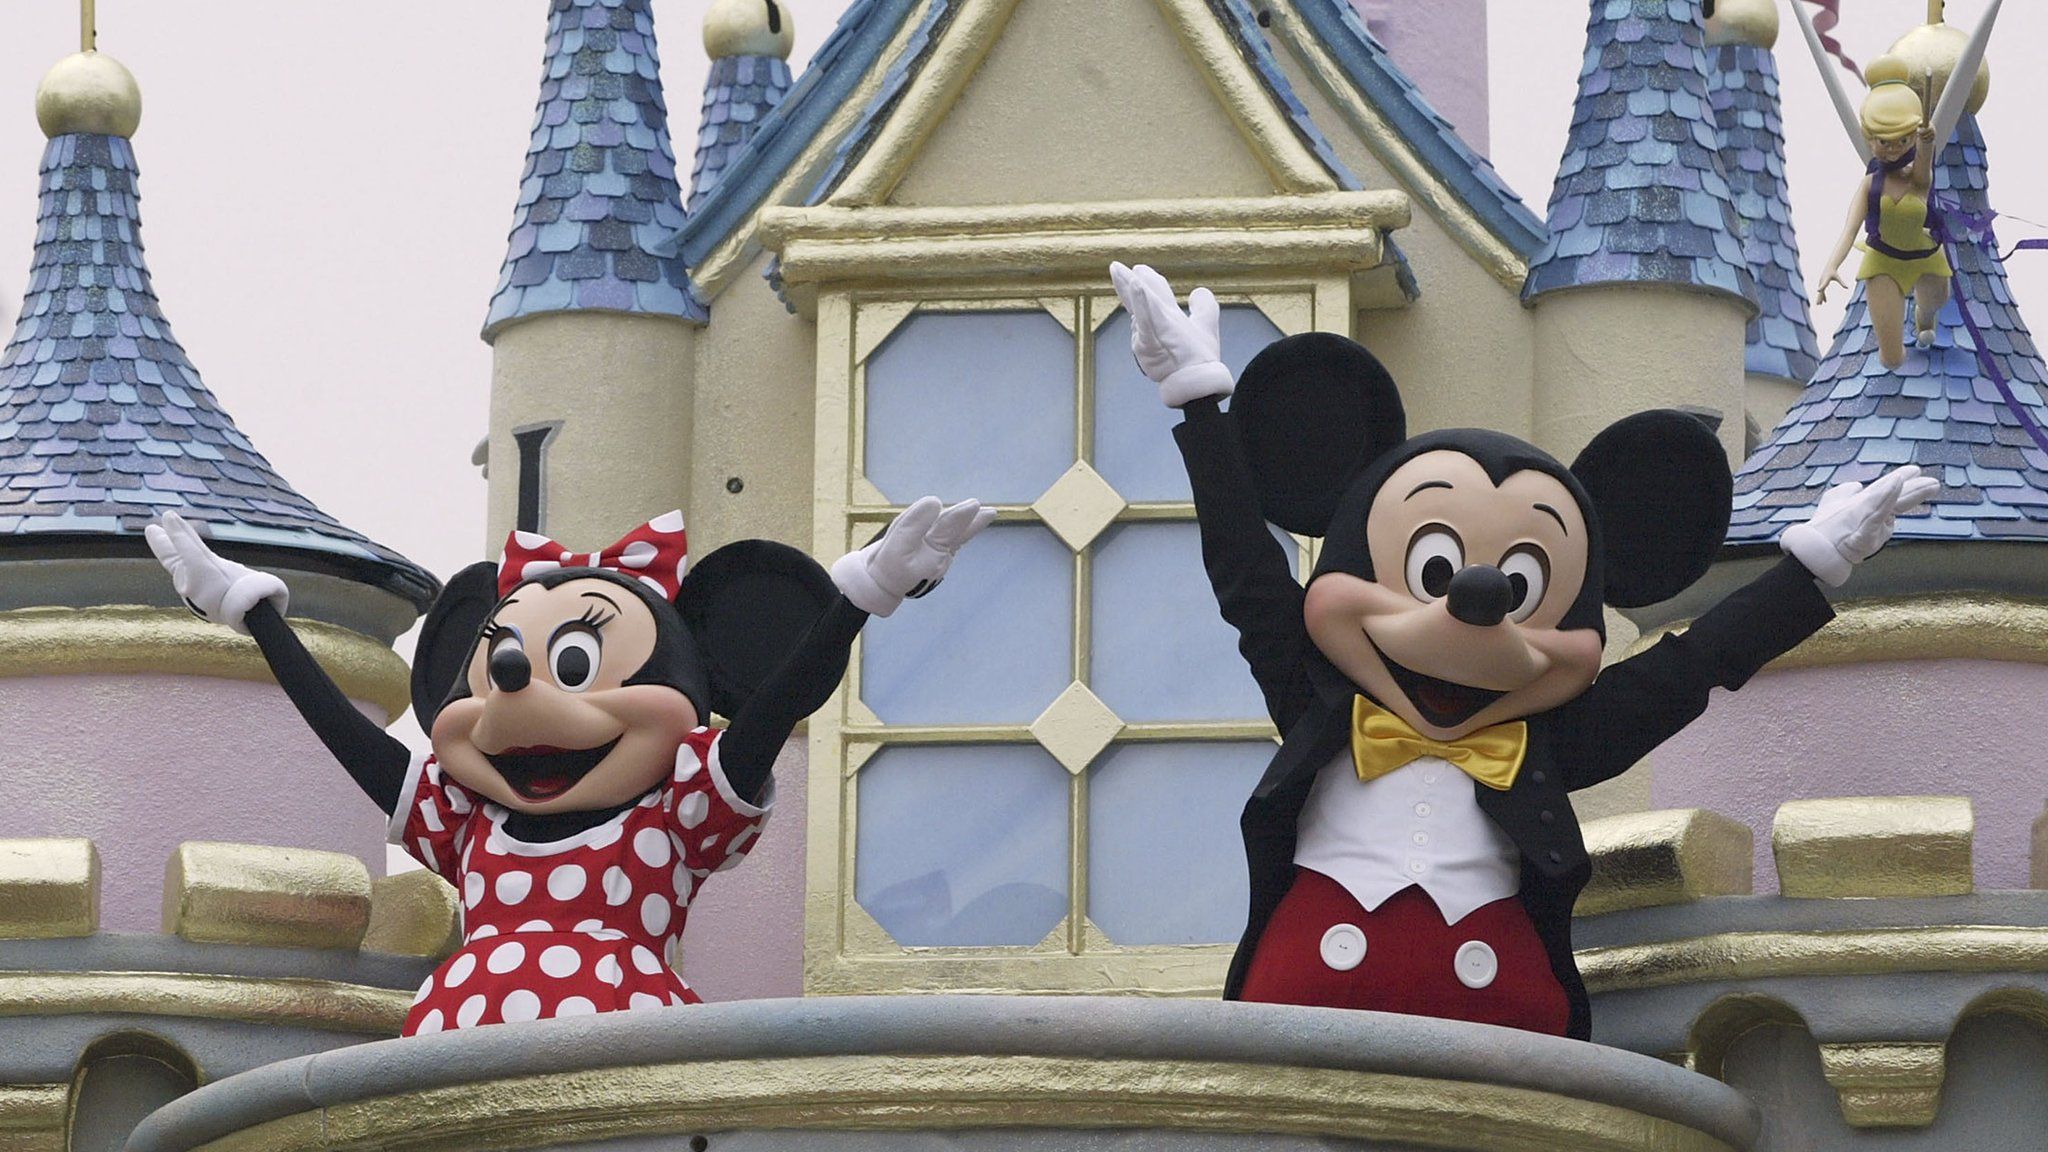 Disney characters Mickey Mouse and Minnie Mouse